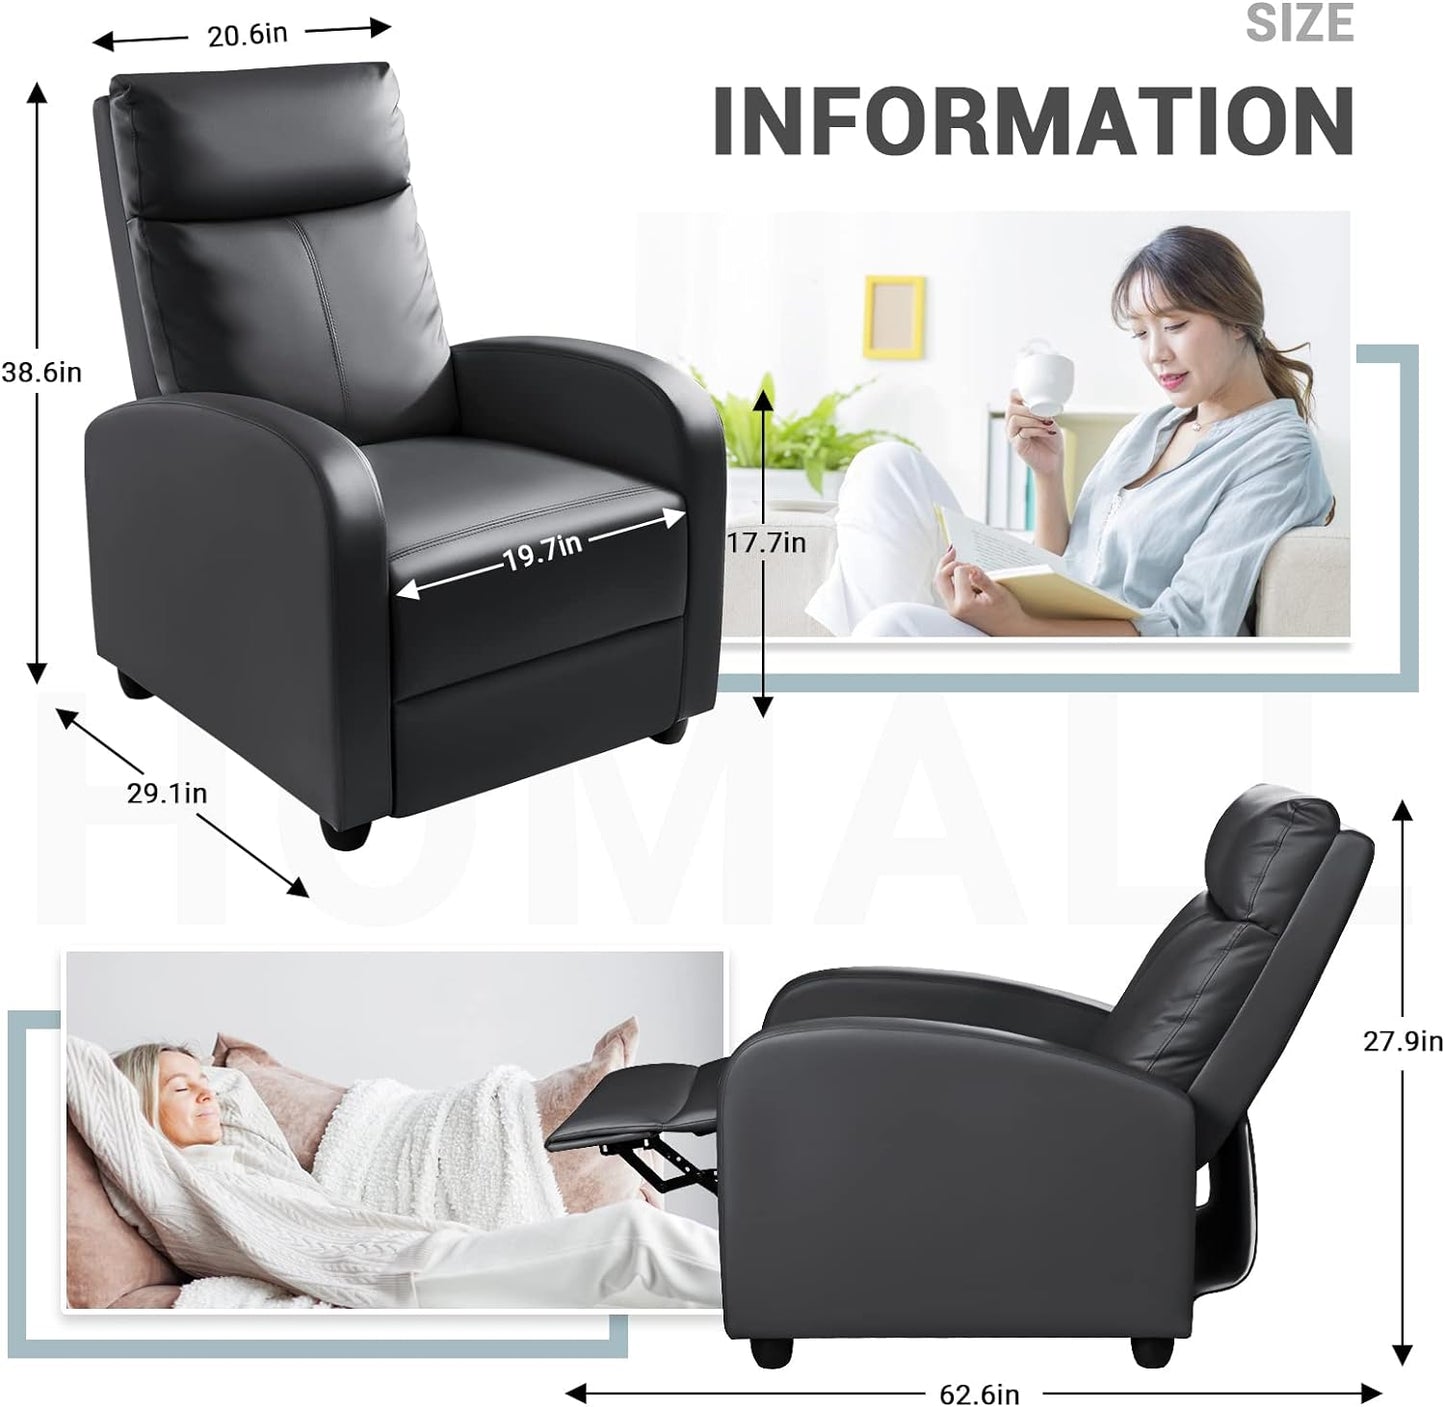 Massage Recliner Chair, Recliner Sofa PU Leather for Adults, Recliners Home Theater Seating with Lumbar Support, Reclining Sofa Chair for Living Room (Dark Black, Leather)